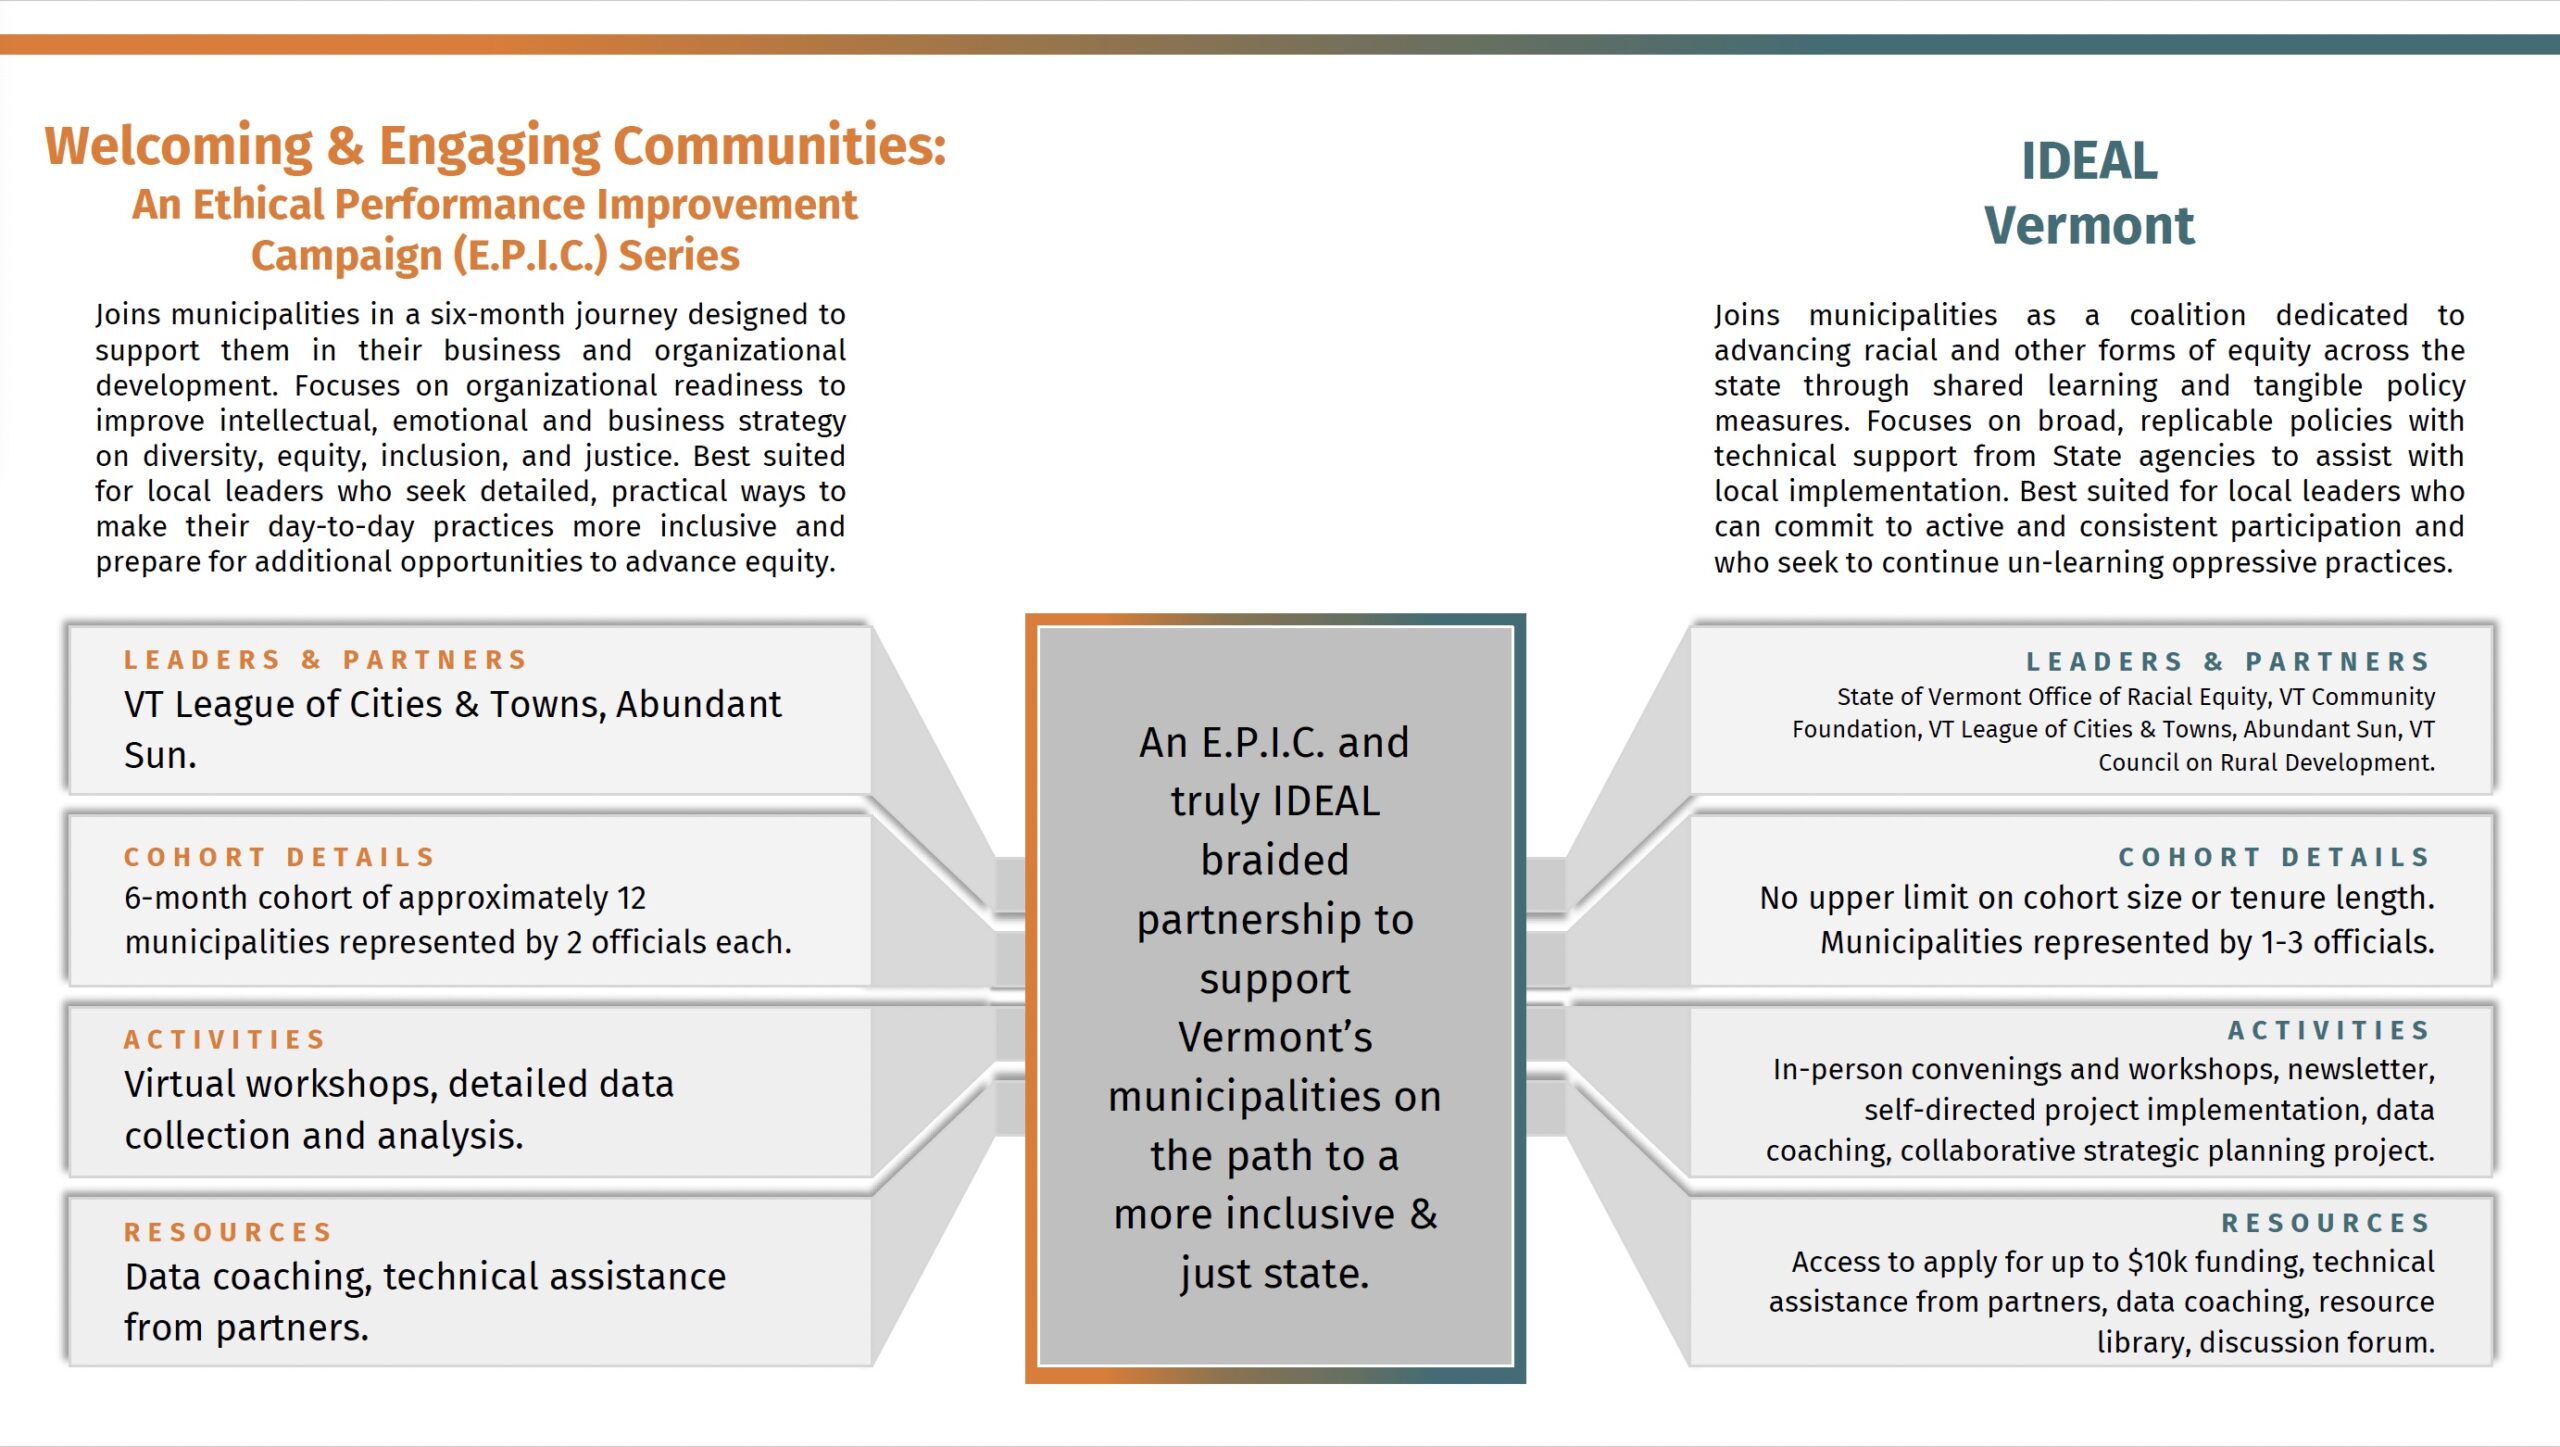 Graphic outlining the E.P.I.C series in collaboration with IDEAL